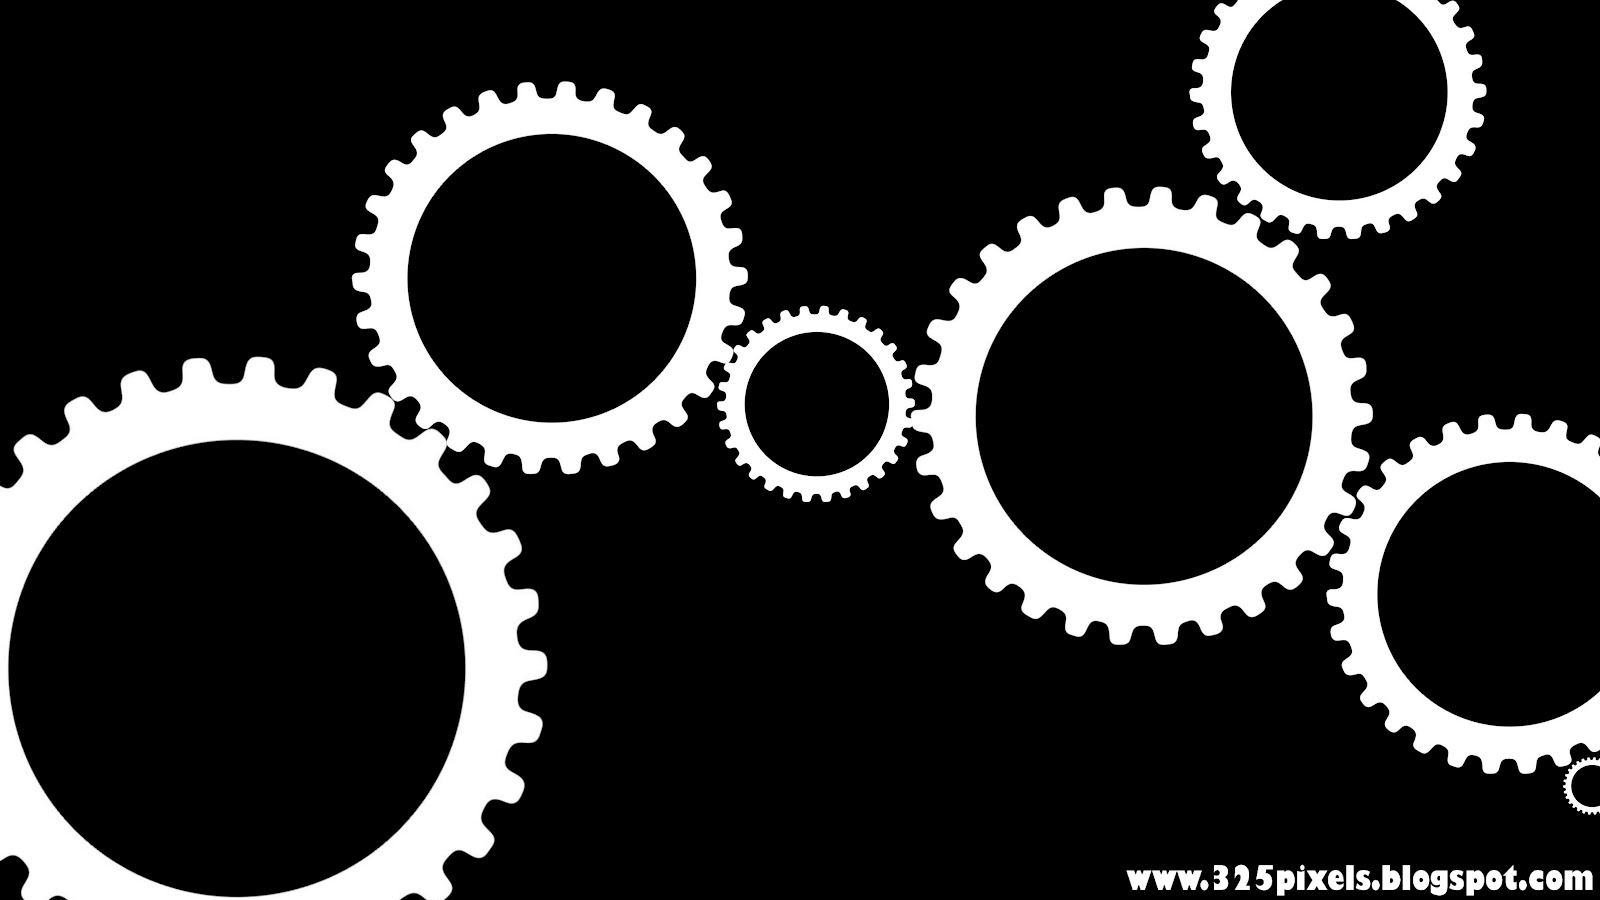 HD Wallpaper And Image Awesome Gears